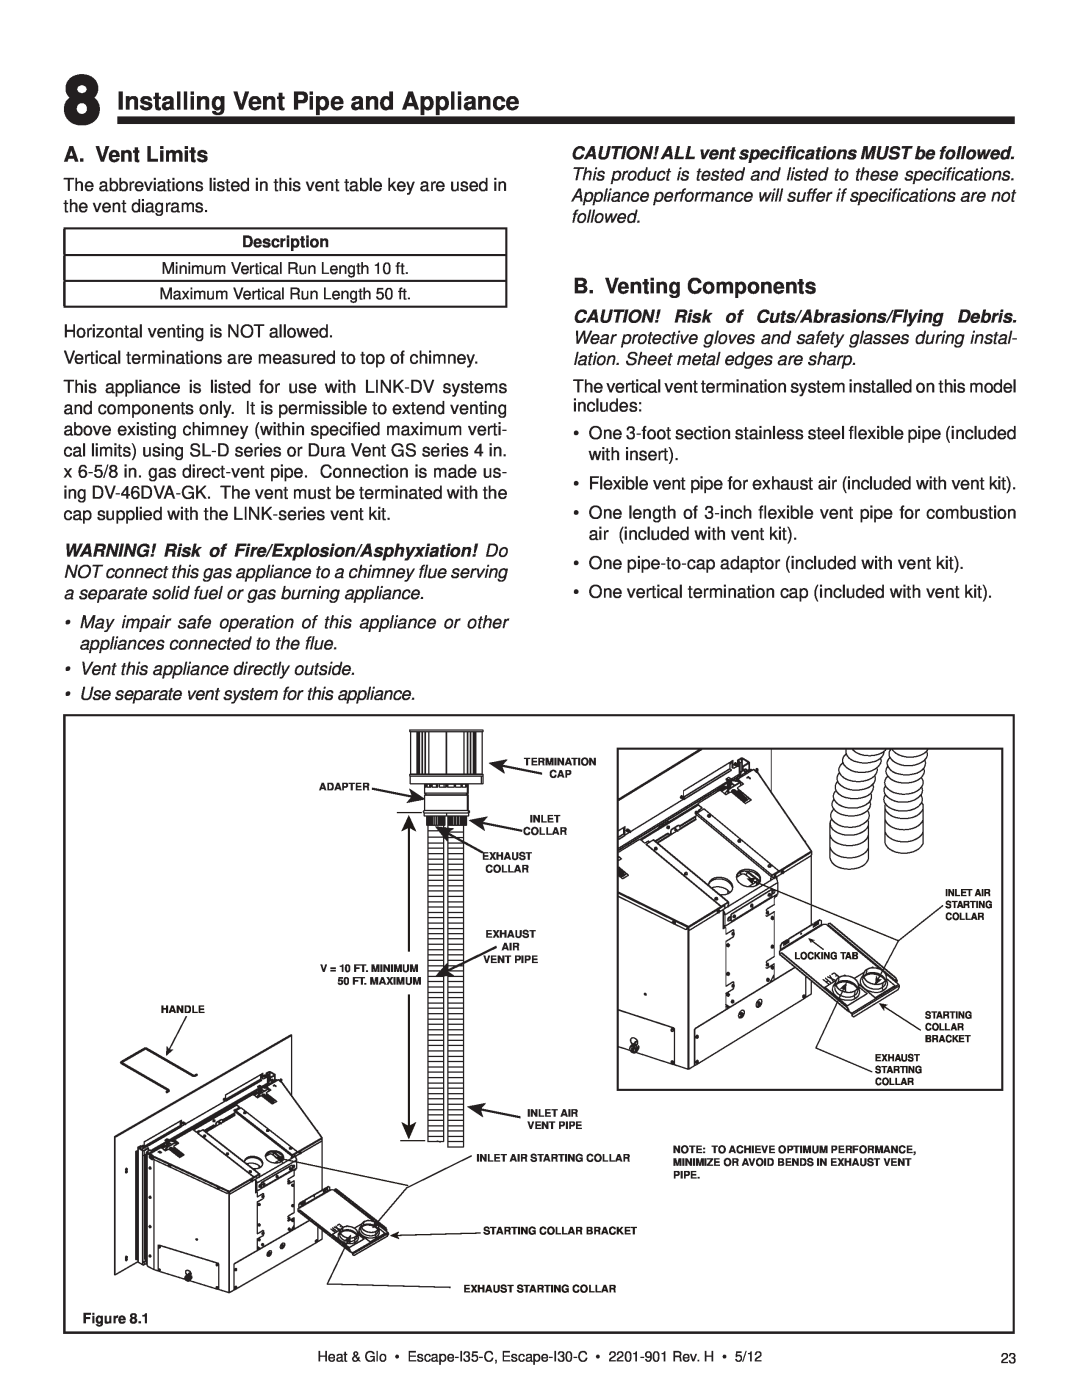 Heat & Glo LifeStyle ESCAPE-I35-C owner manual Installing Vent Pipe and Appliance, A. Vent Limits, B. Venting Components 